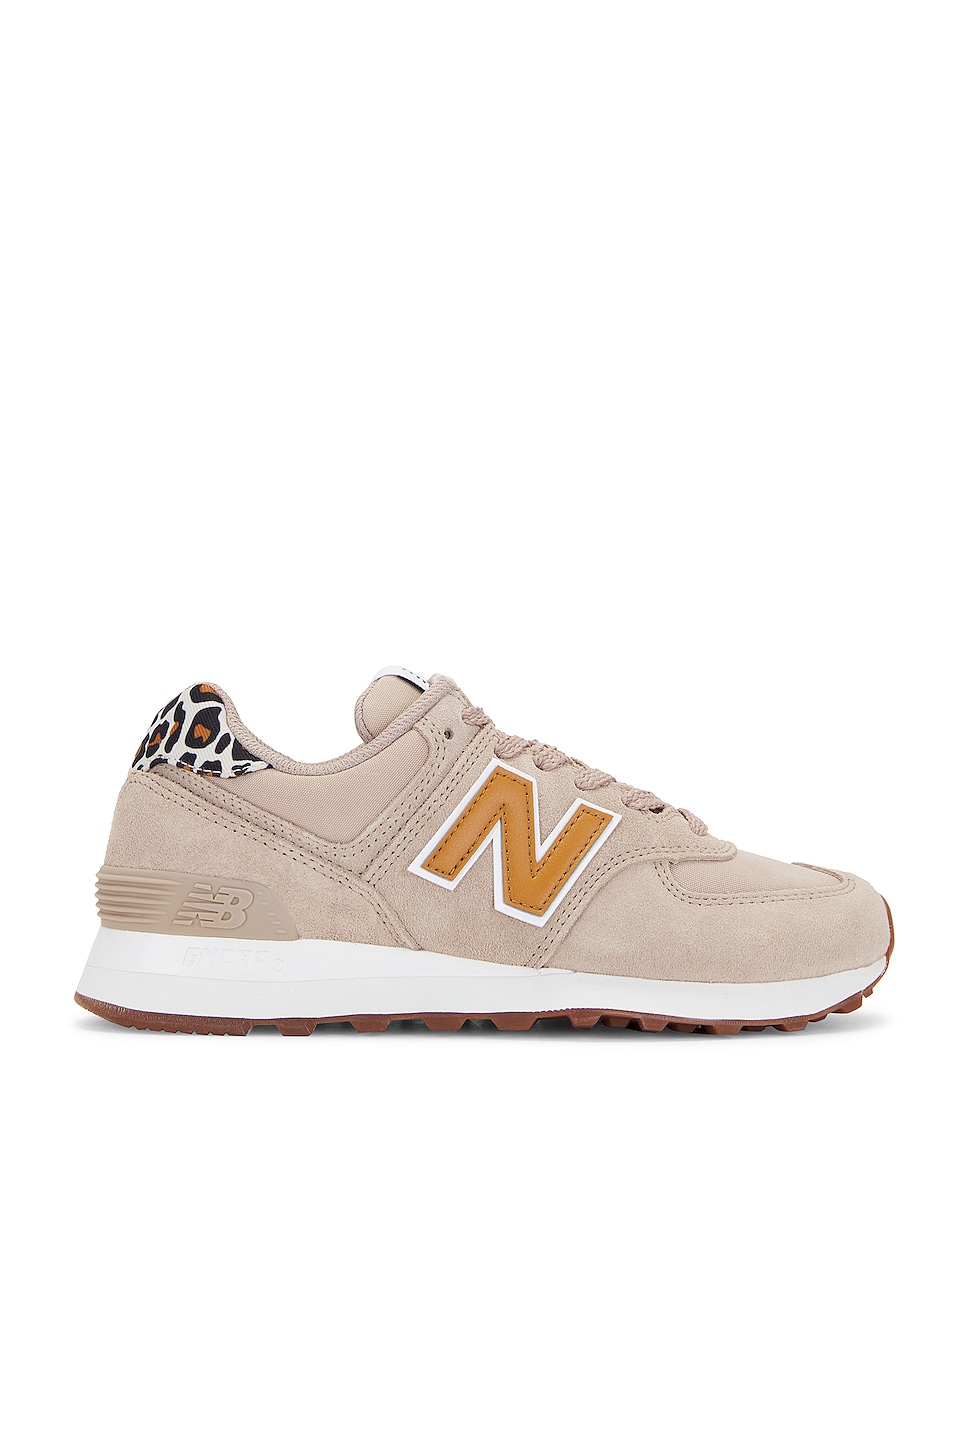 Image 1 of New Balance 574 Sneaker in Mindful Grey, Tobacco, & White